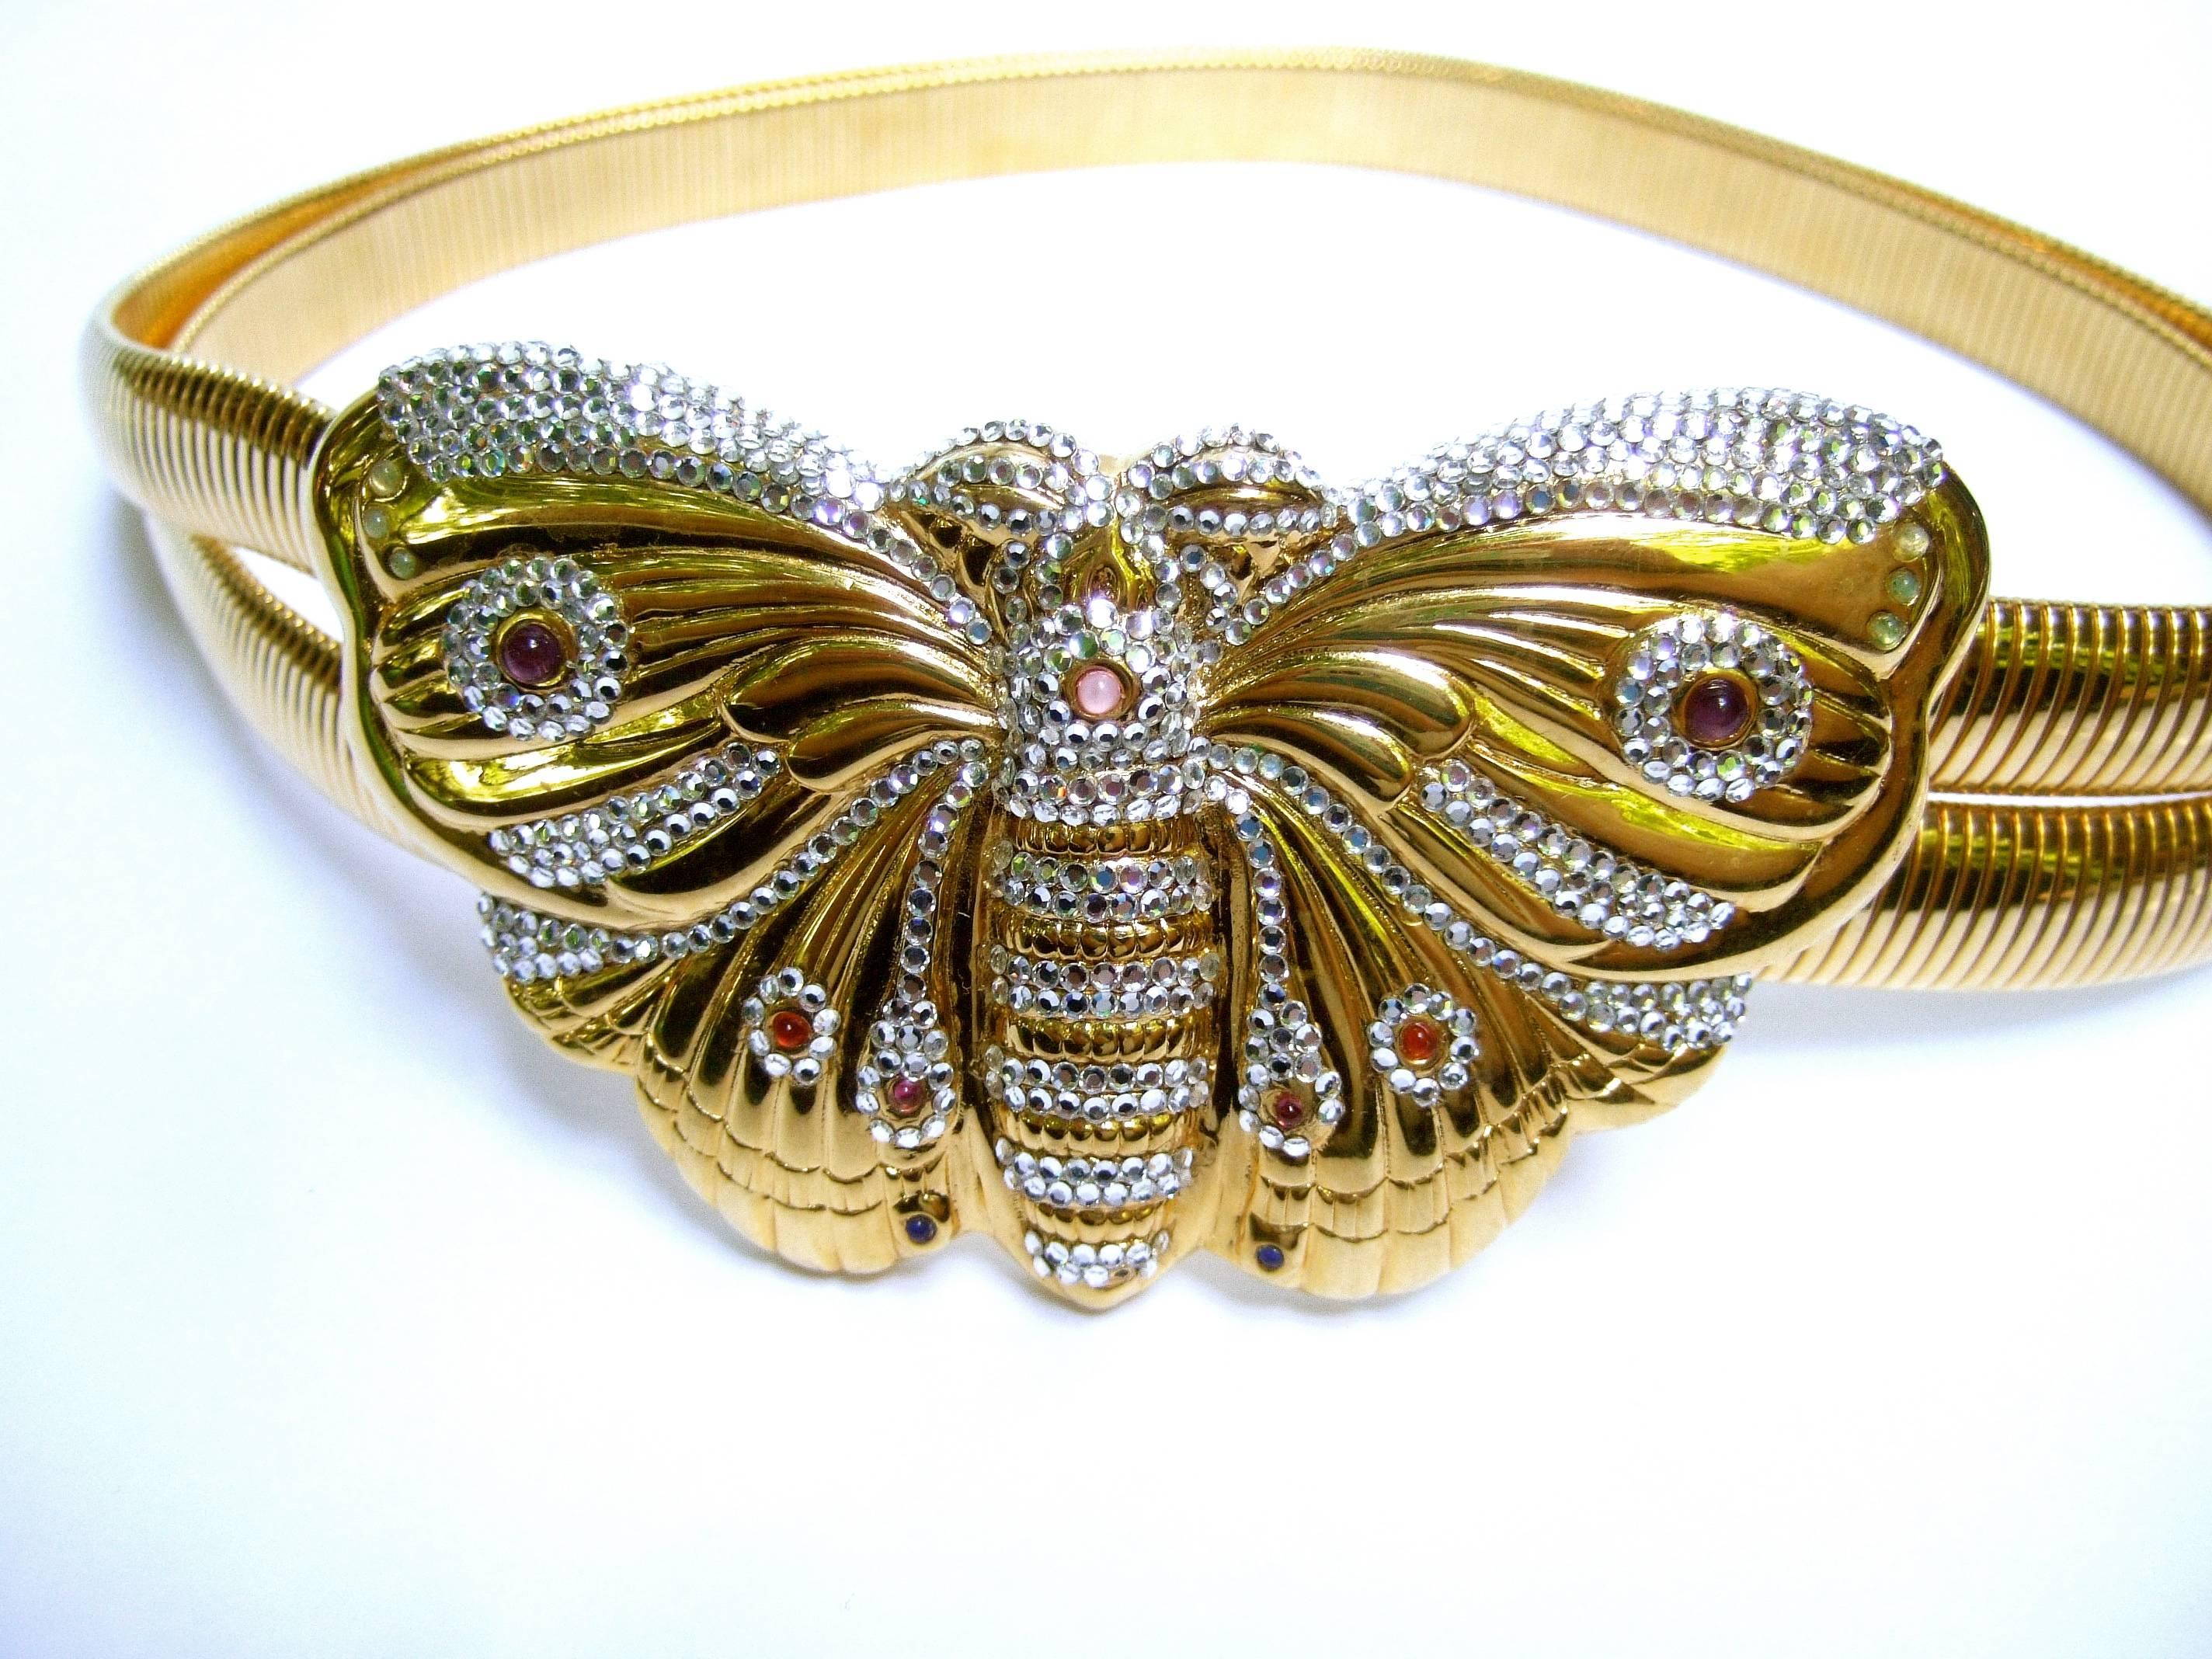 Judith Leiber Exquisite Massive Jeweled Butterfly Belt circa 1980s 1